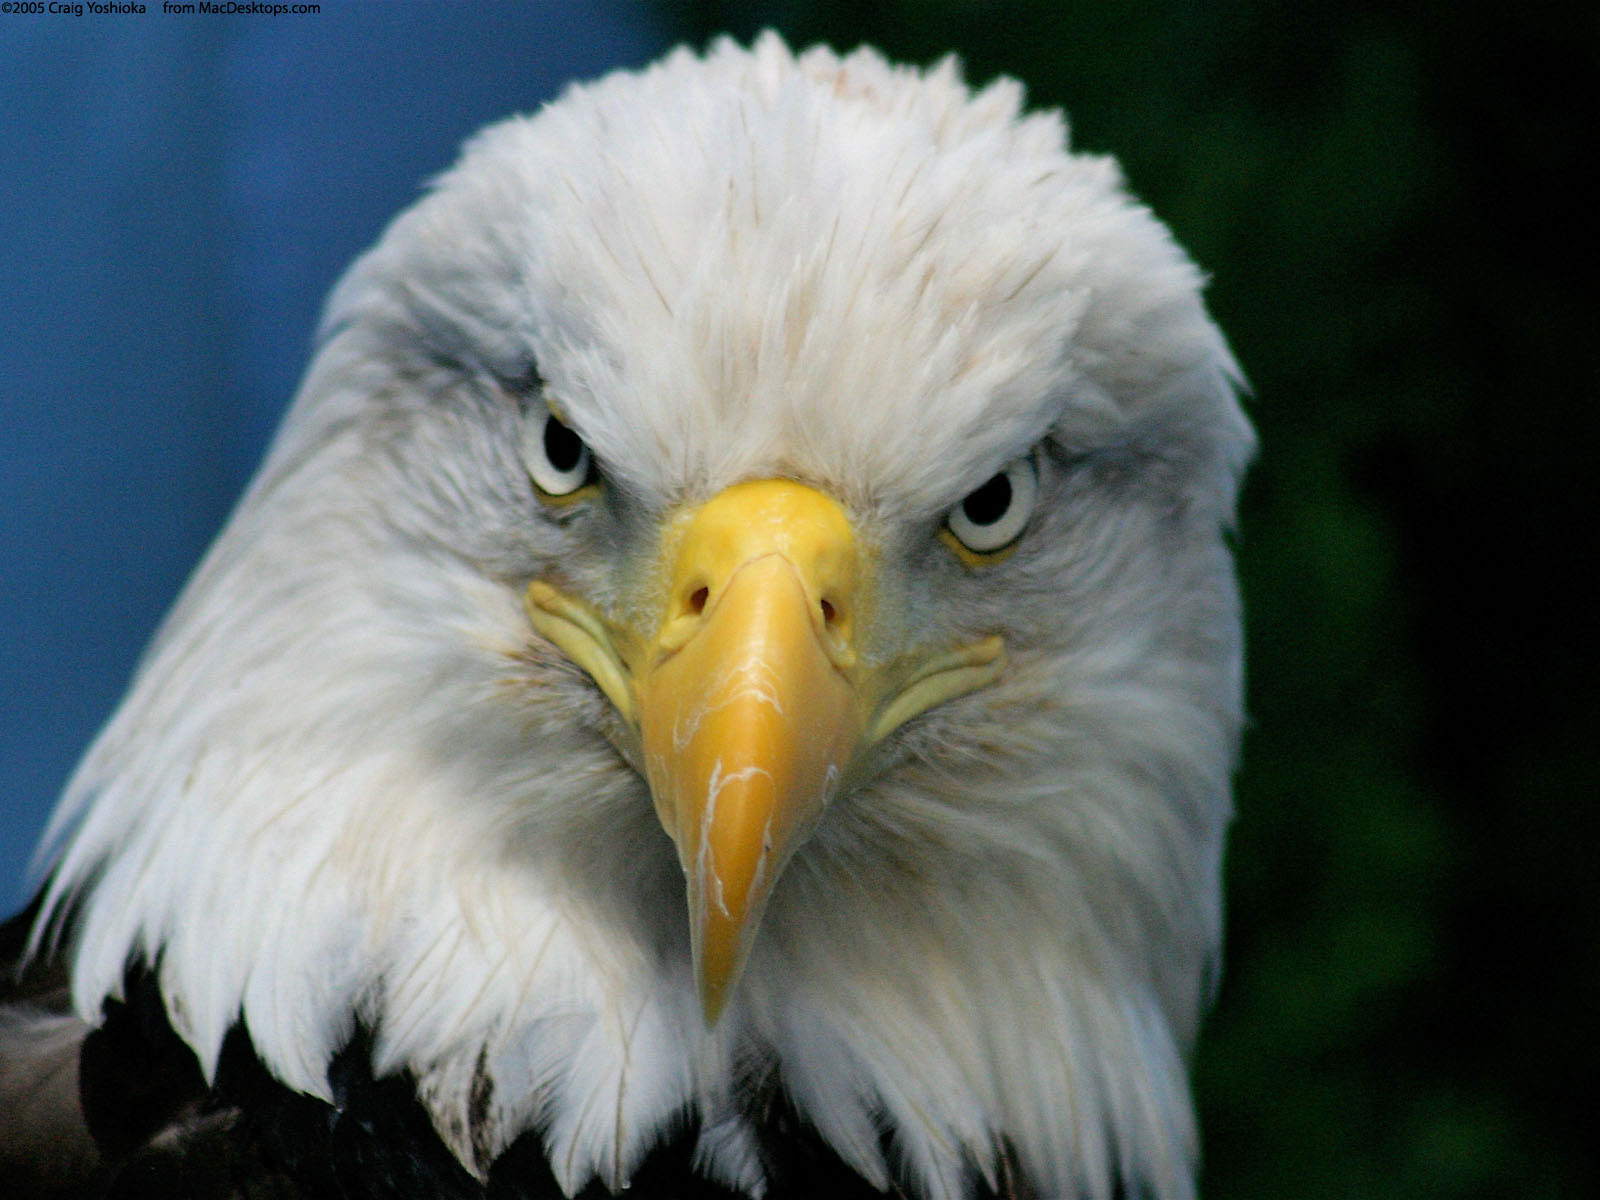 Bald Eagle Wallpapers Fun Animals Wiki Videos Pictures